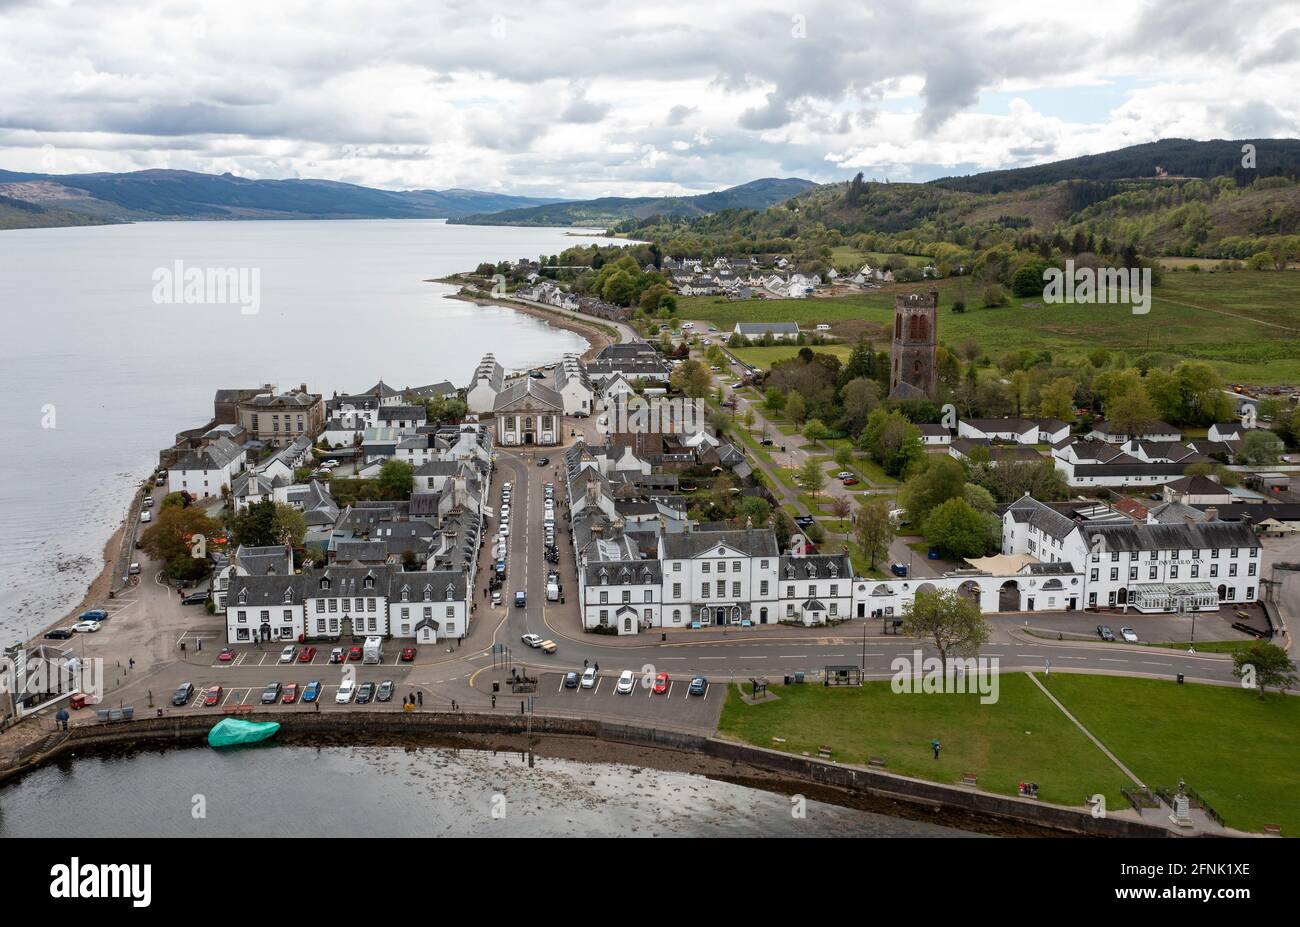 Aerial view of Inveraray town centre on the shores of Loch Fyne, Argyll, Scotland. Stock Photo